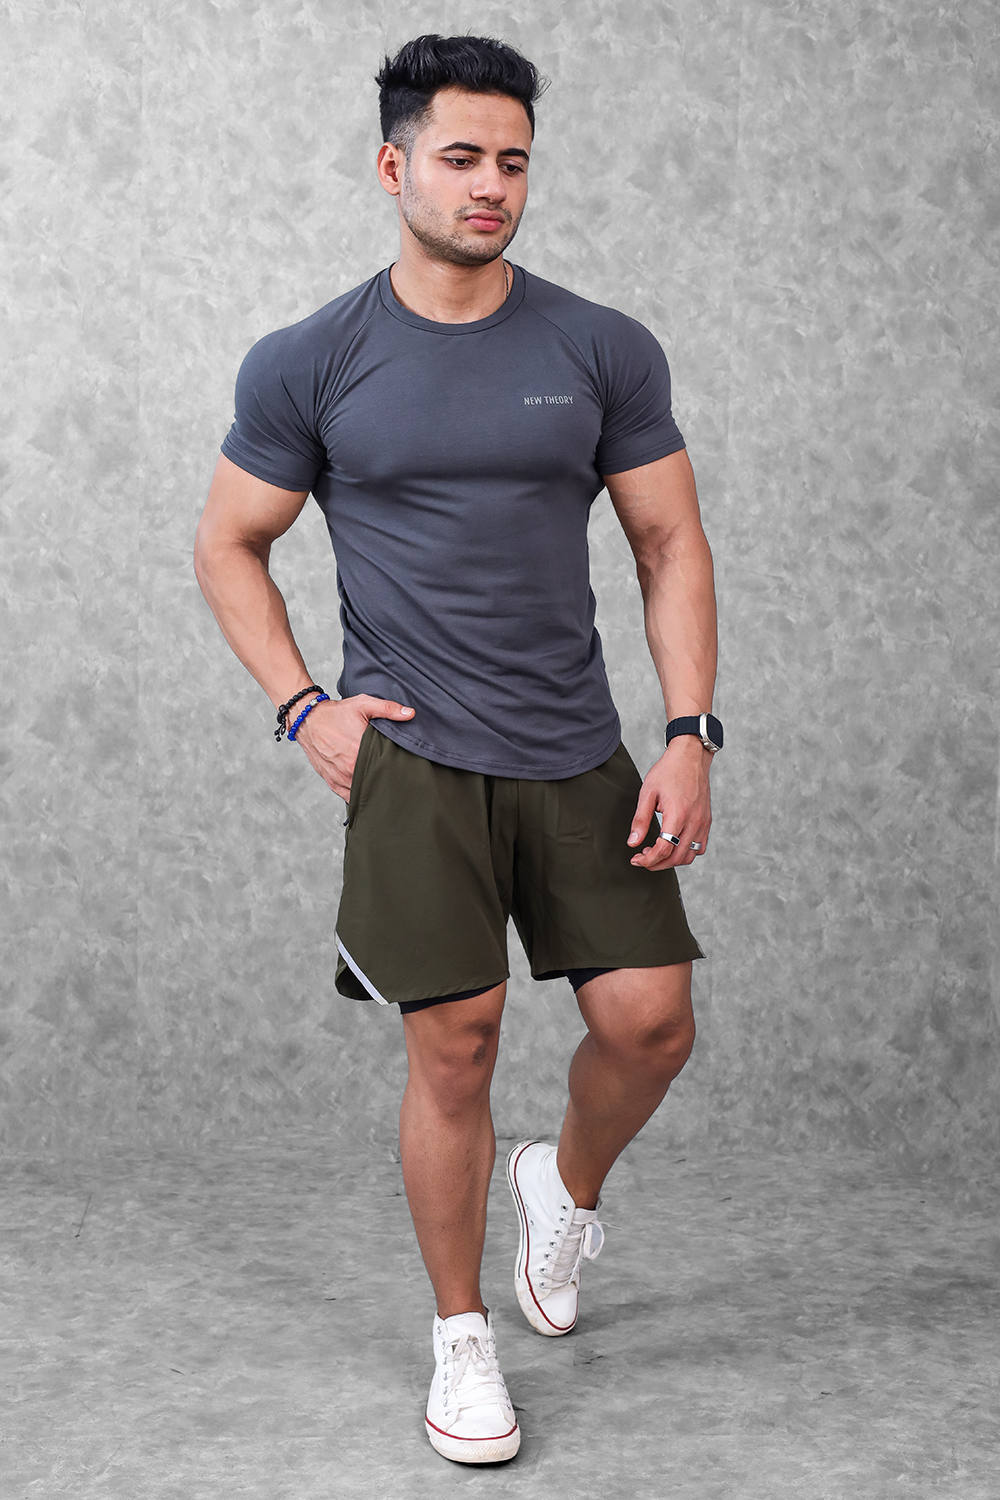 Gymwear T-Shirts For Men  Activewear, Exercise & Workout Clothes Online –  New Theory